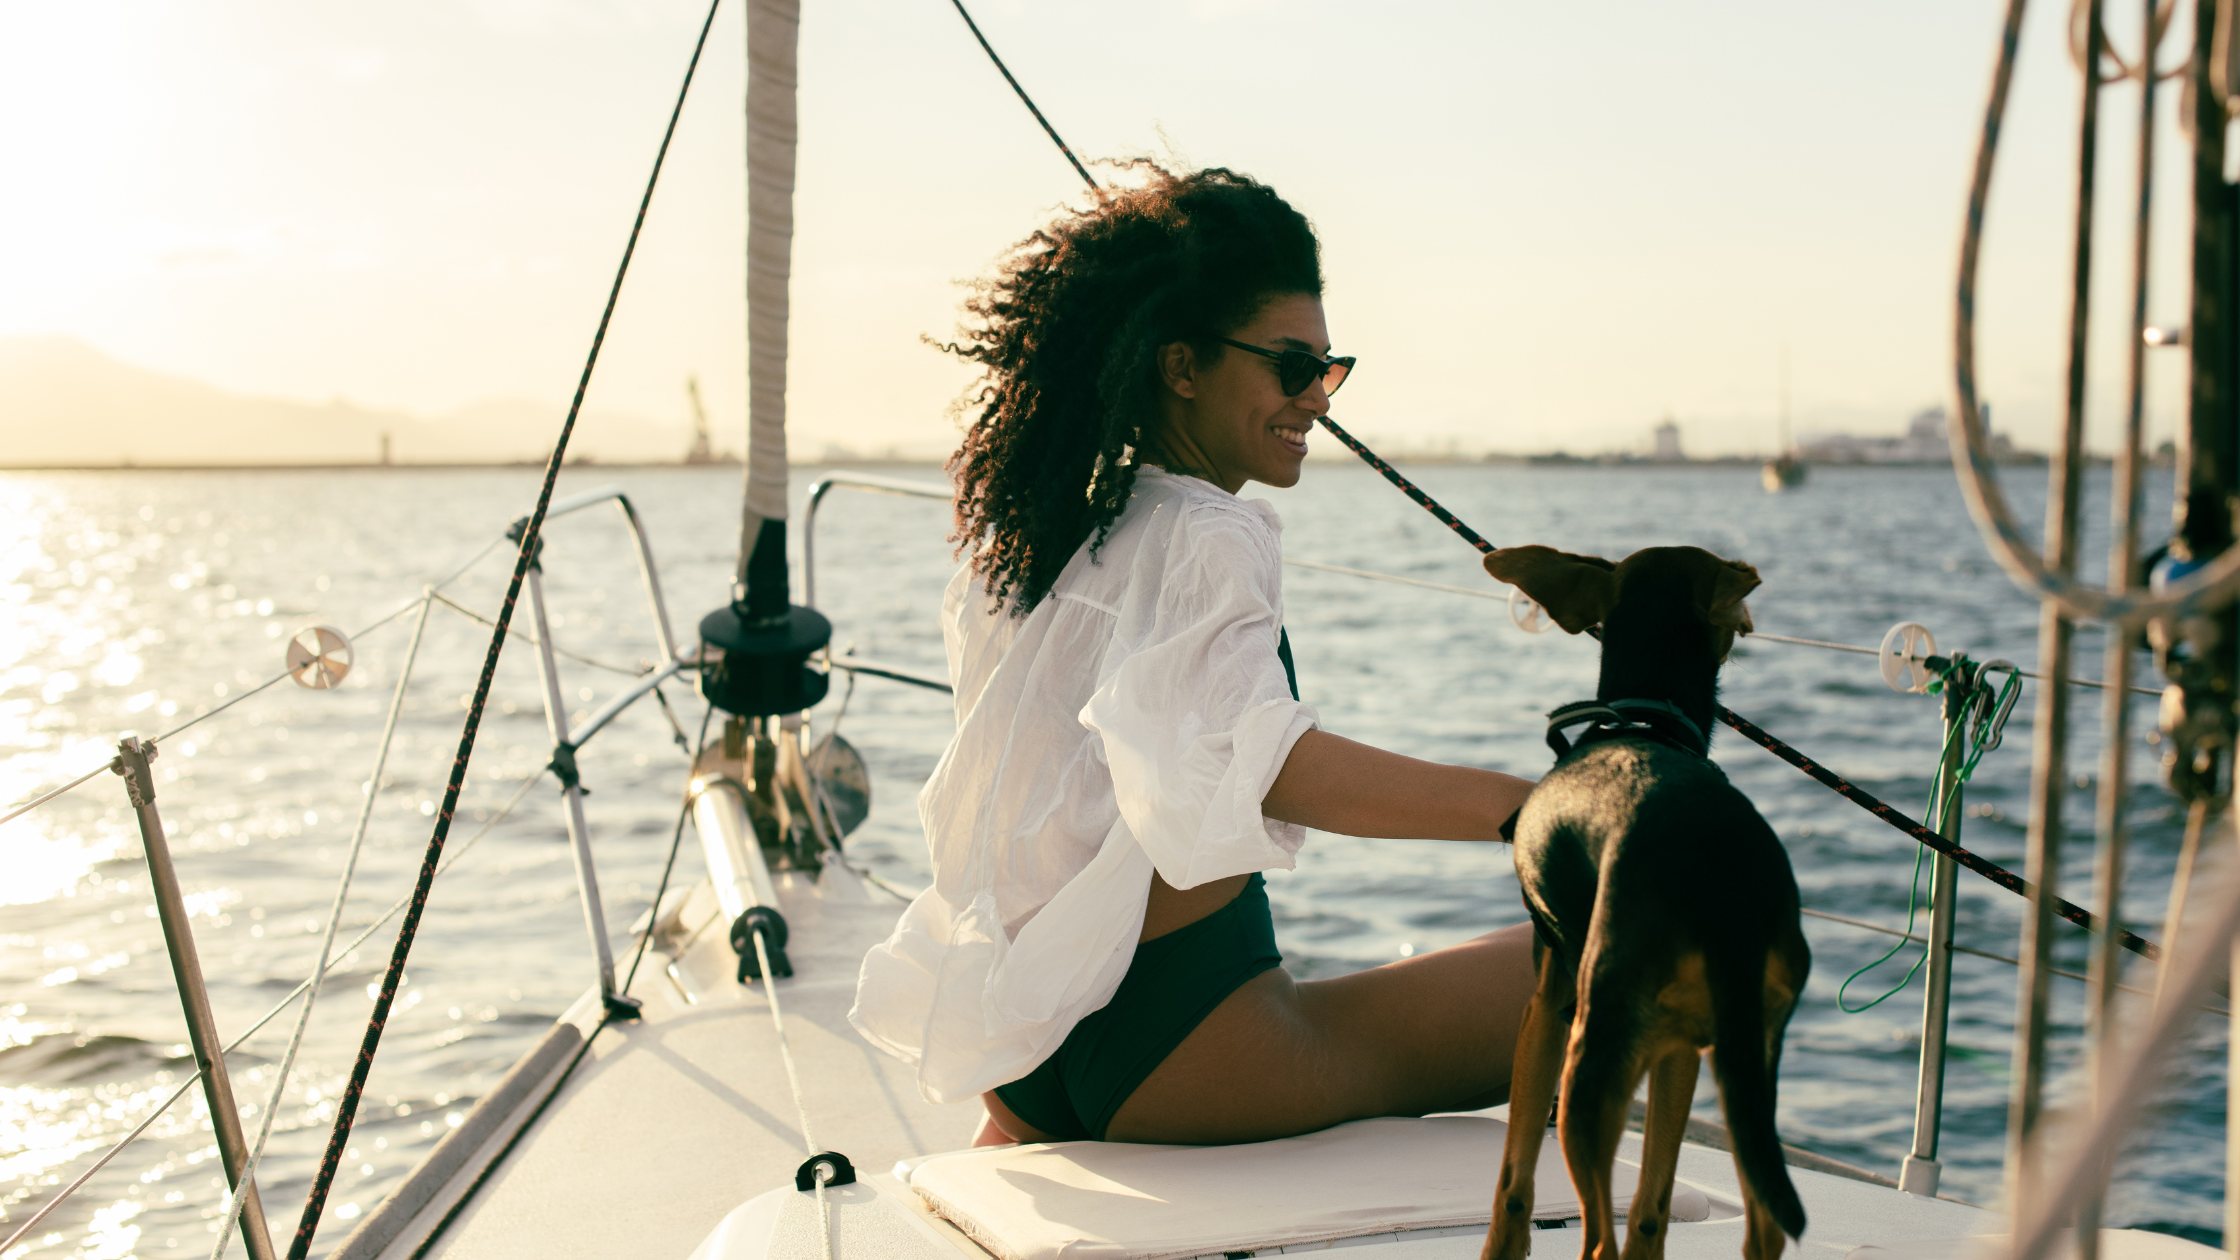 Lady on a boat with her dog